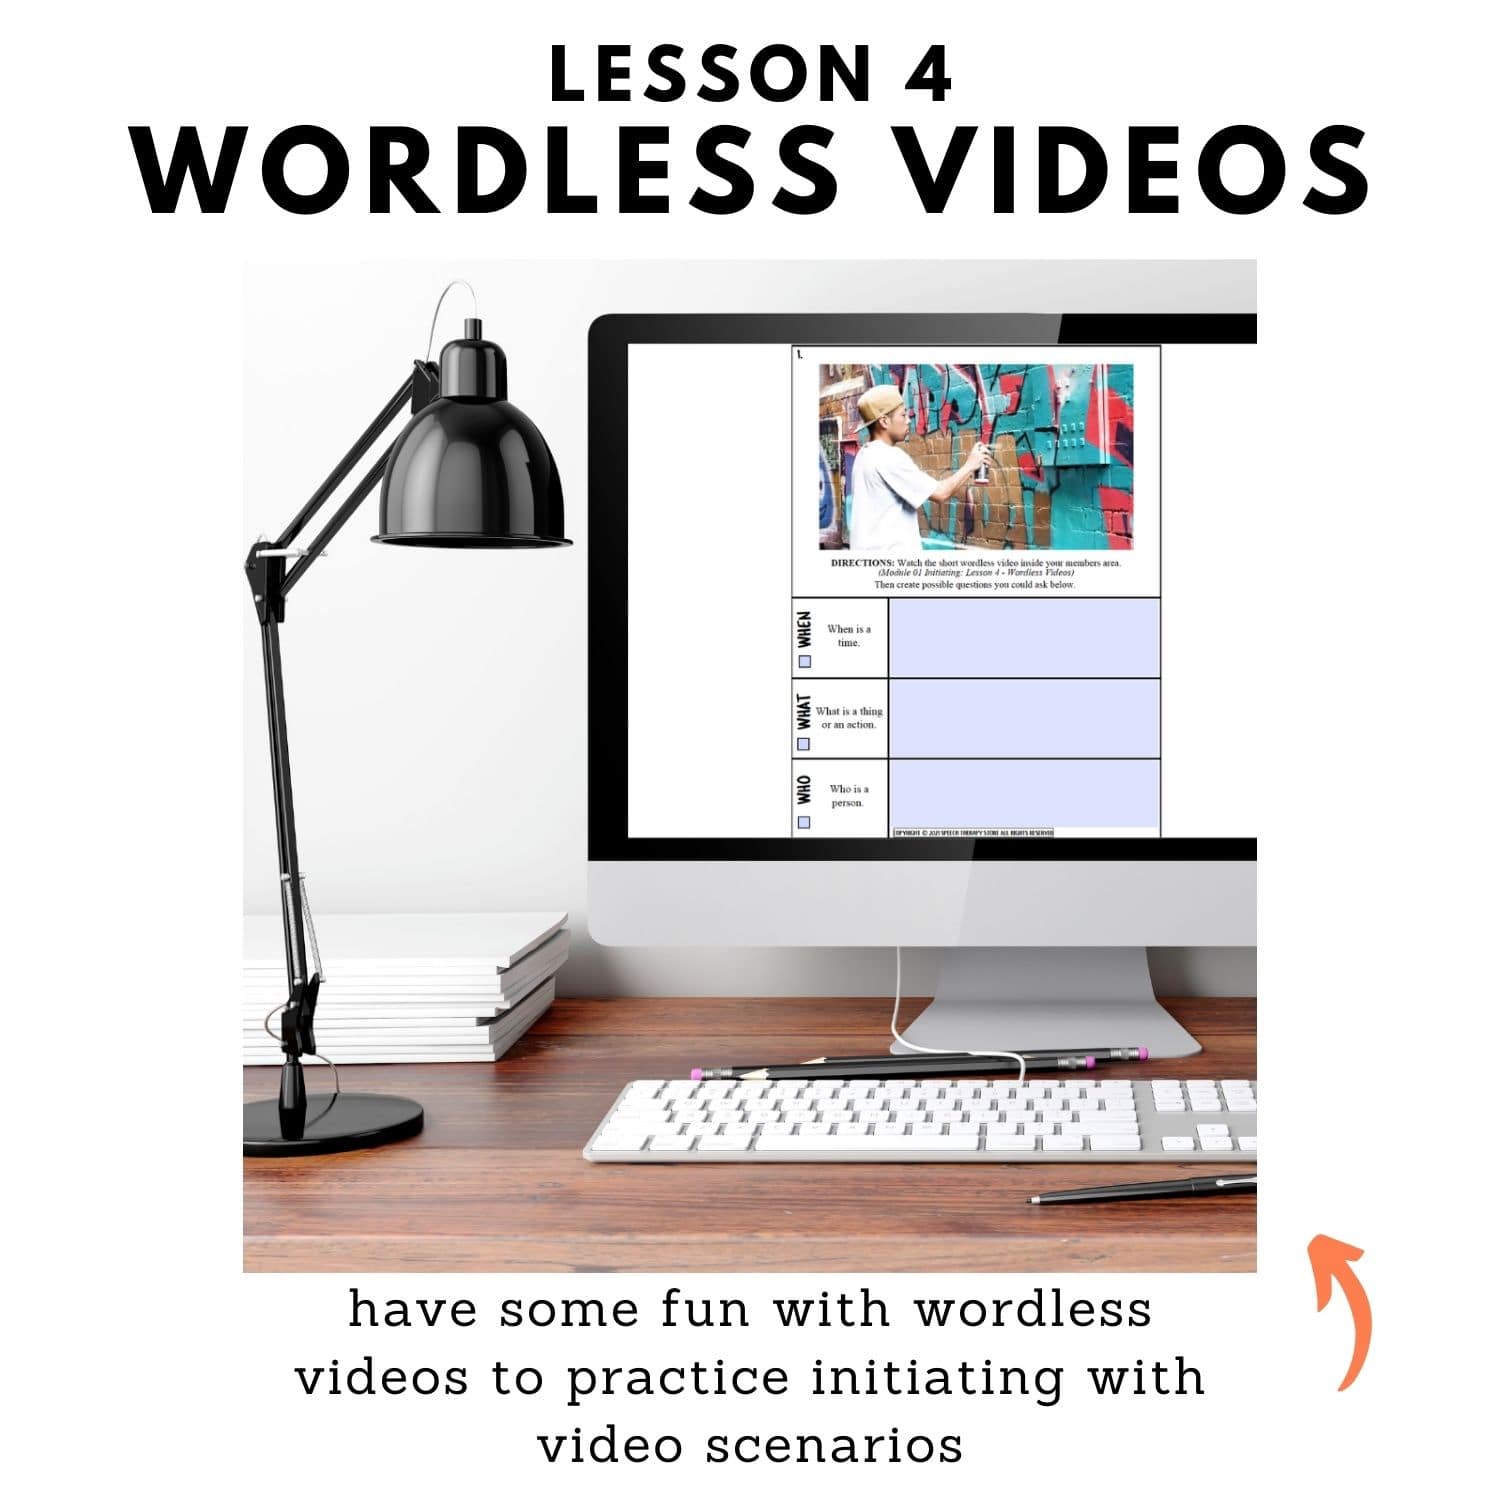 initiating with wordless videos